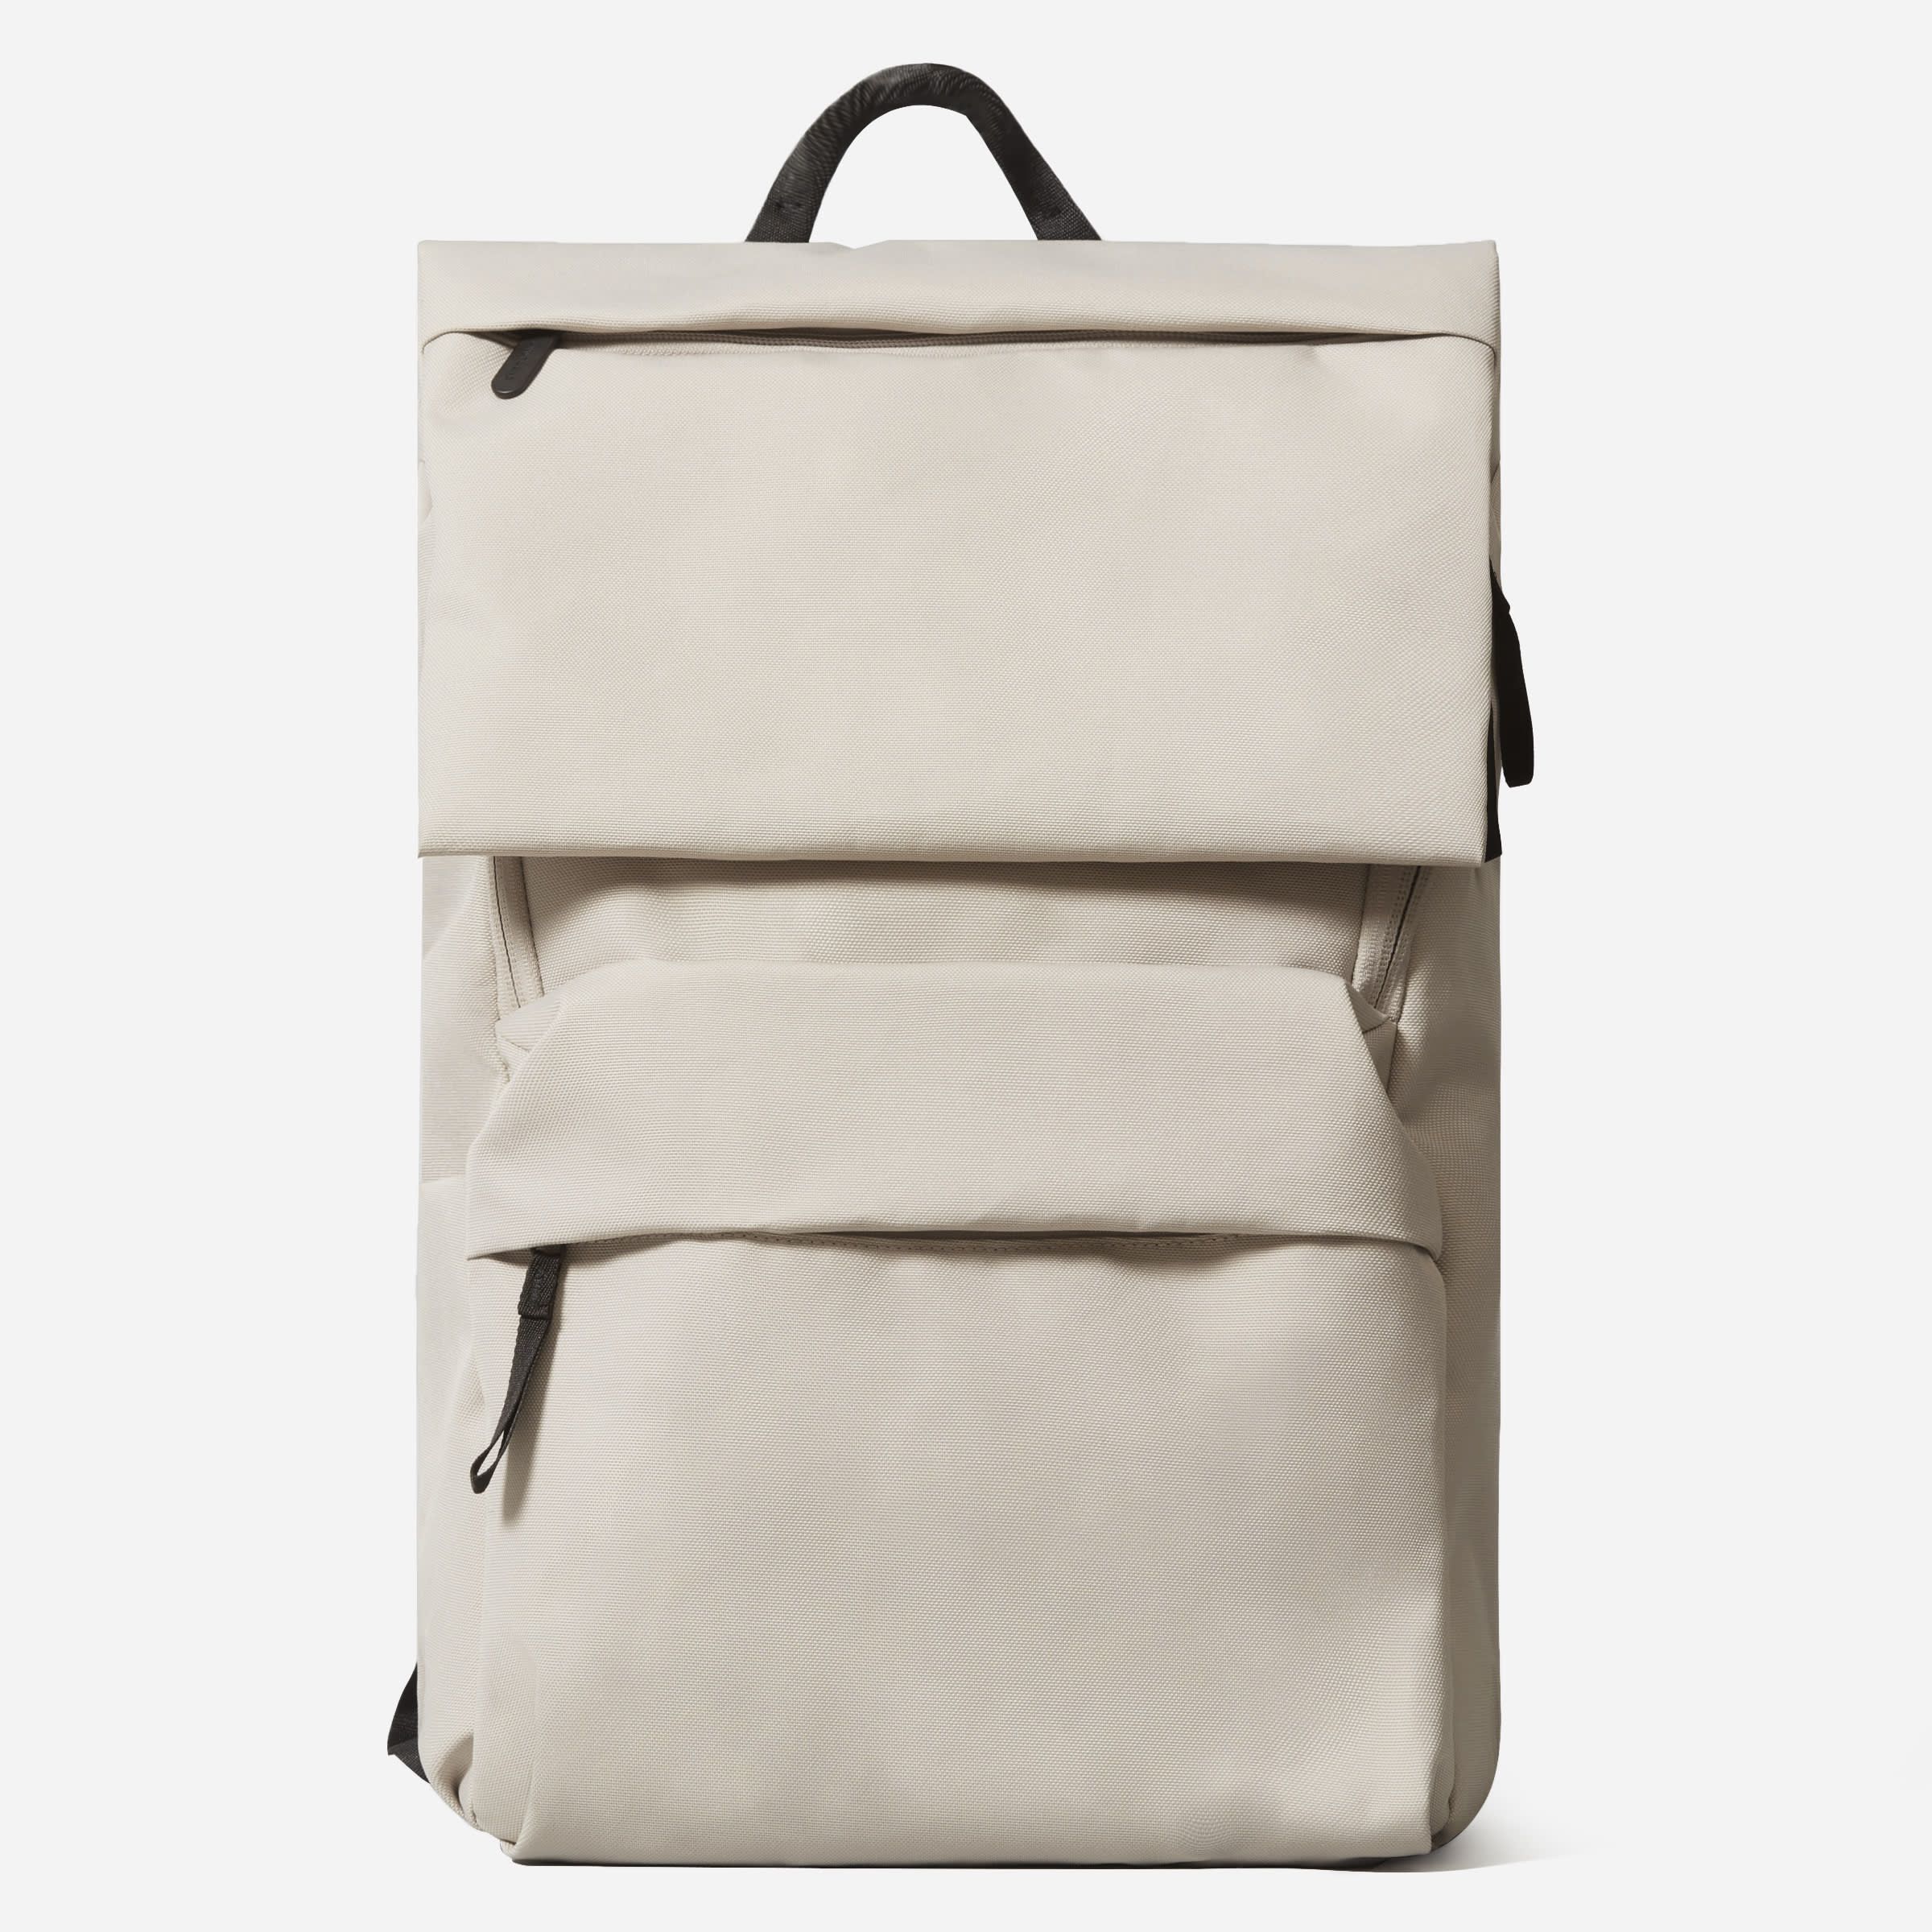 The Best Laptop Bags of 2023